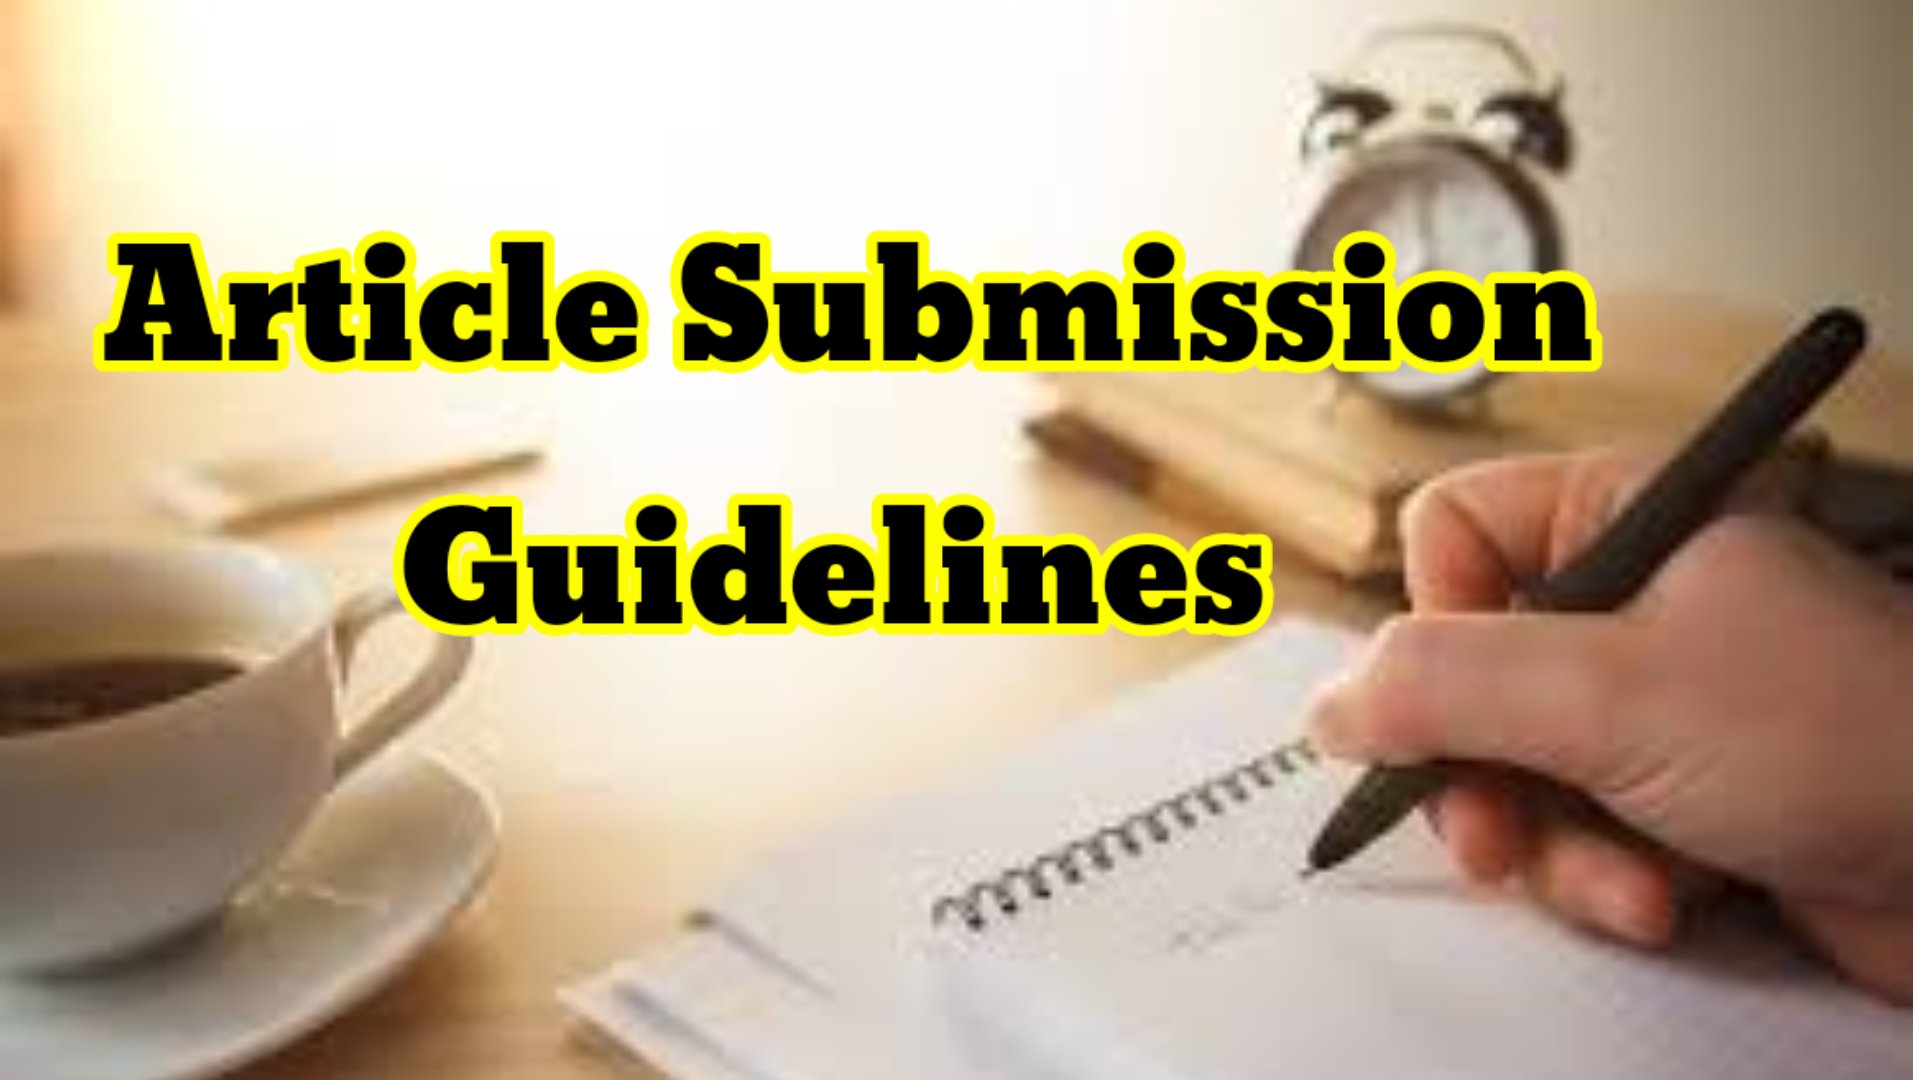 Article Submission Guidelines: Your Pathway to Success